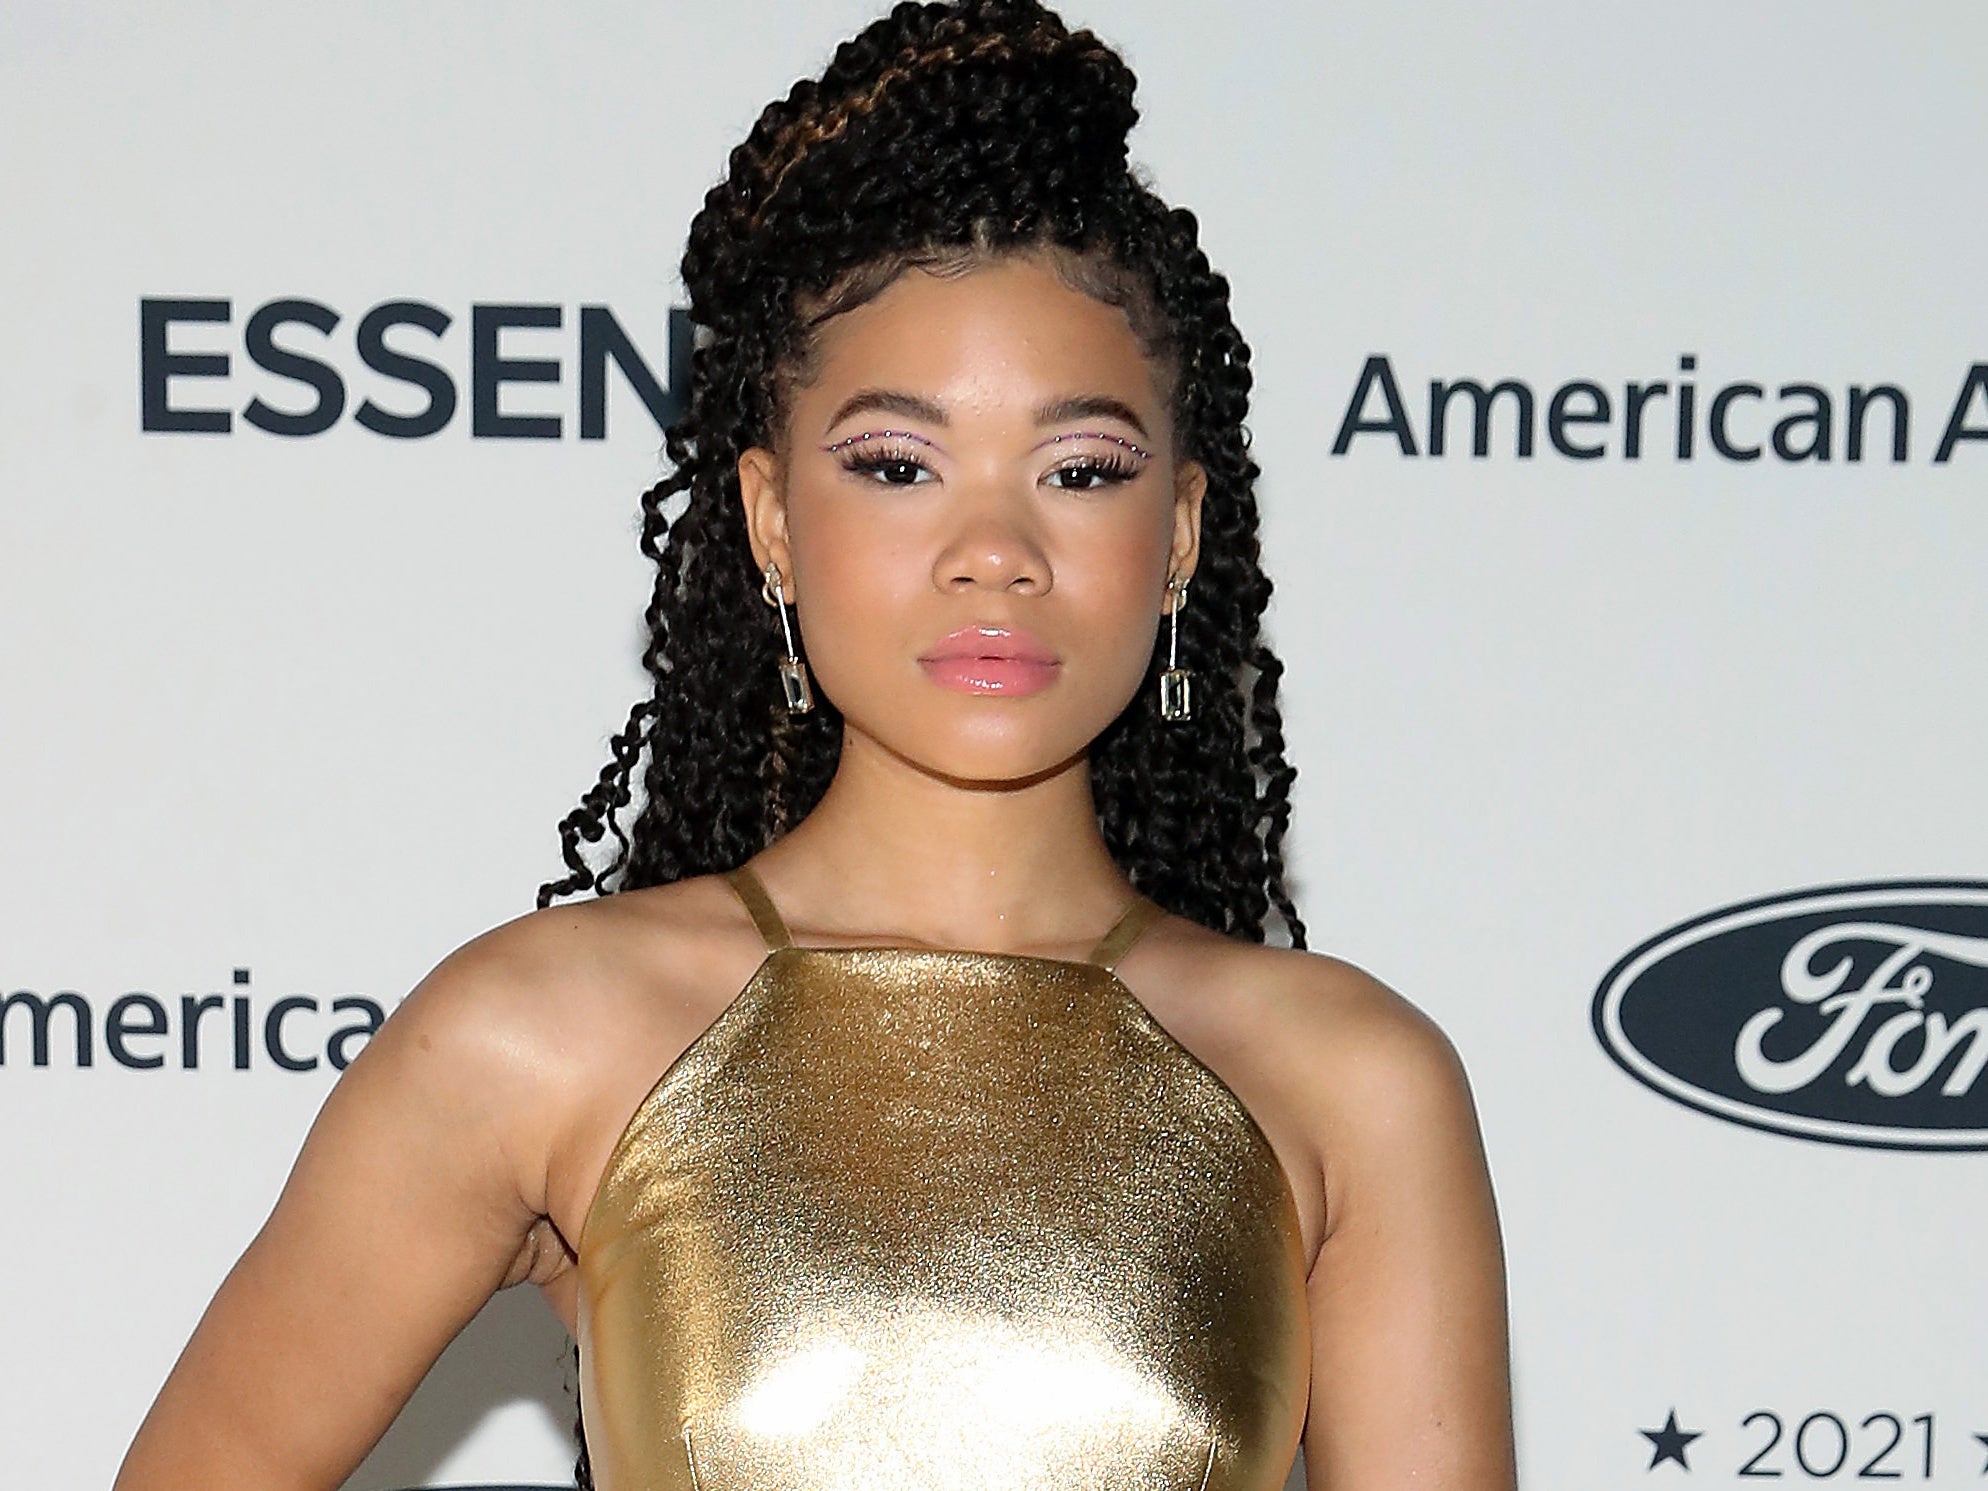 Storm Reid Was A Golden Goddess In This Custom Prada Look On The ESSENCE Red Carpet